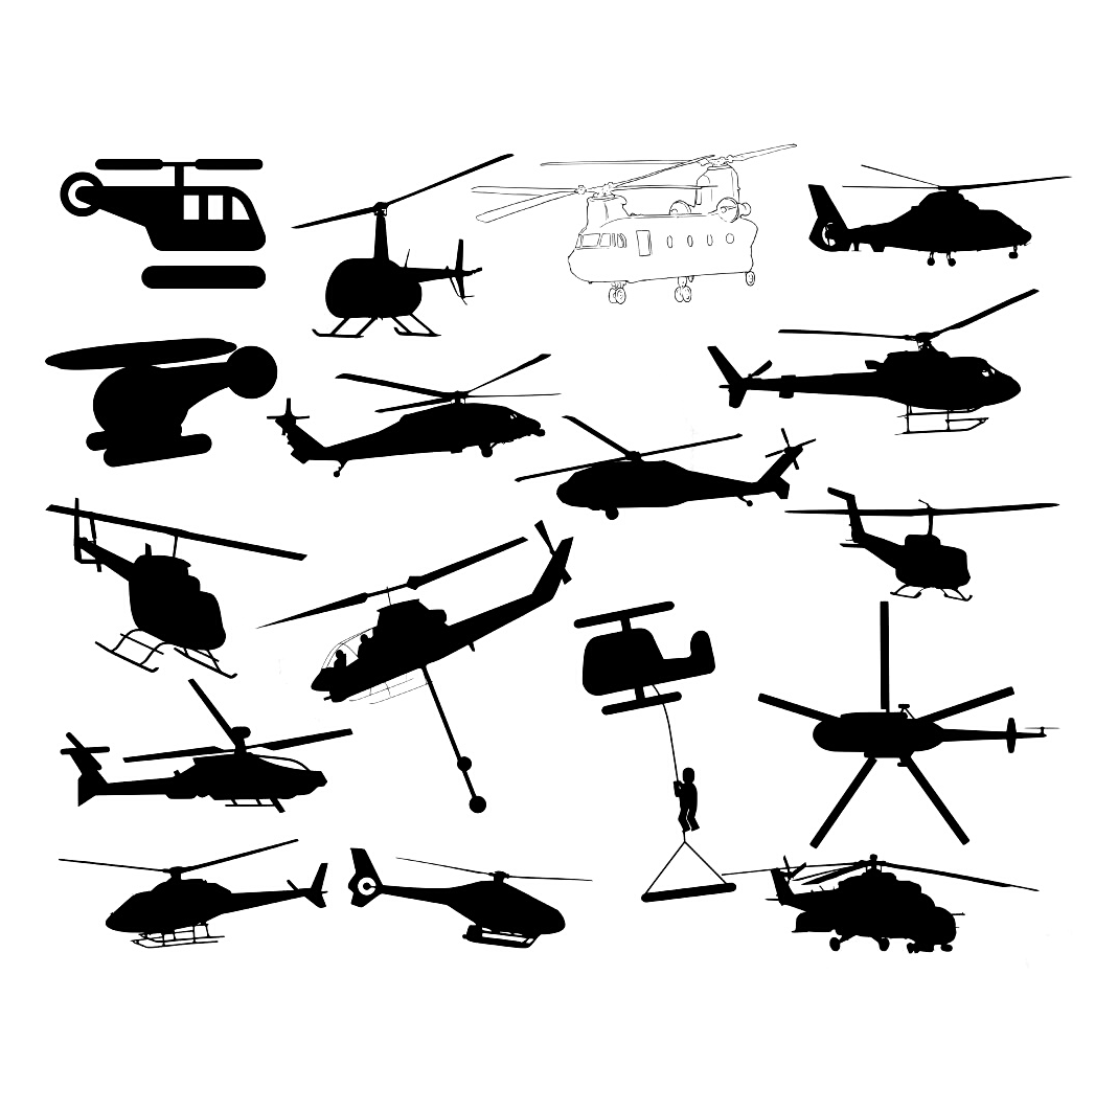 Helicopter Silhouette Bundles cover image.